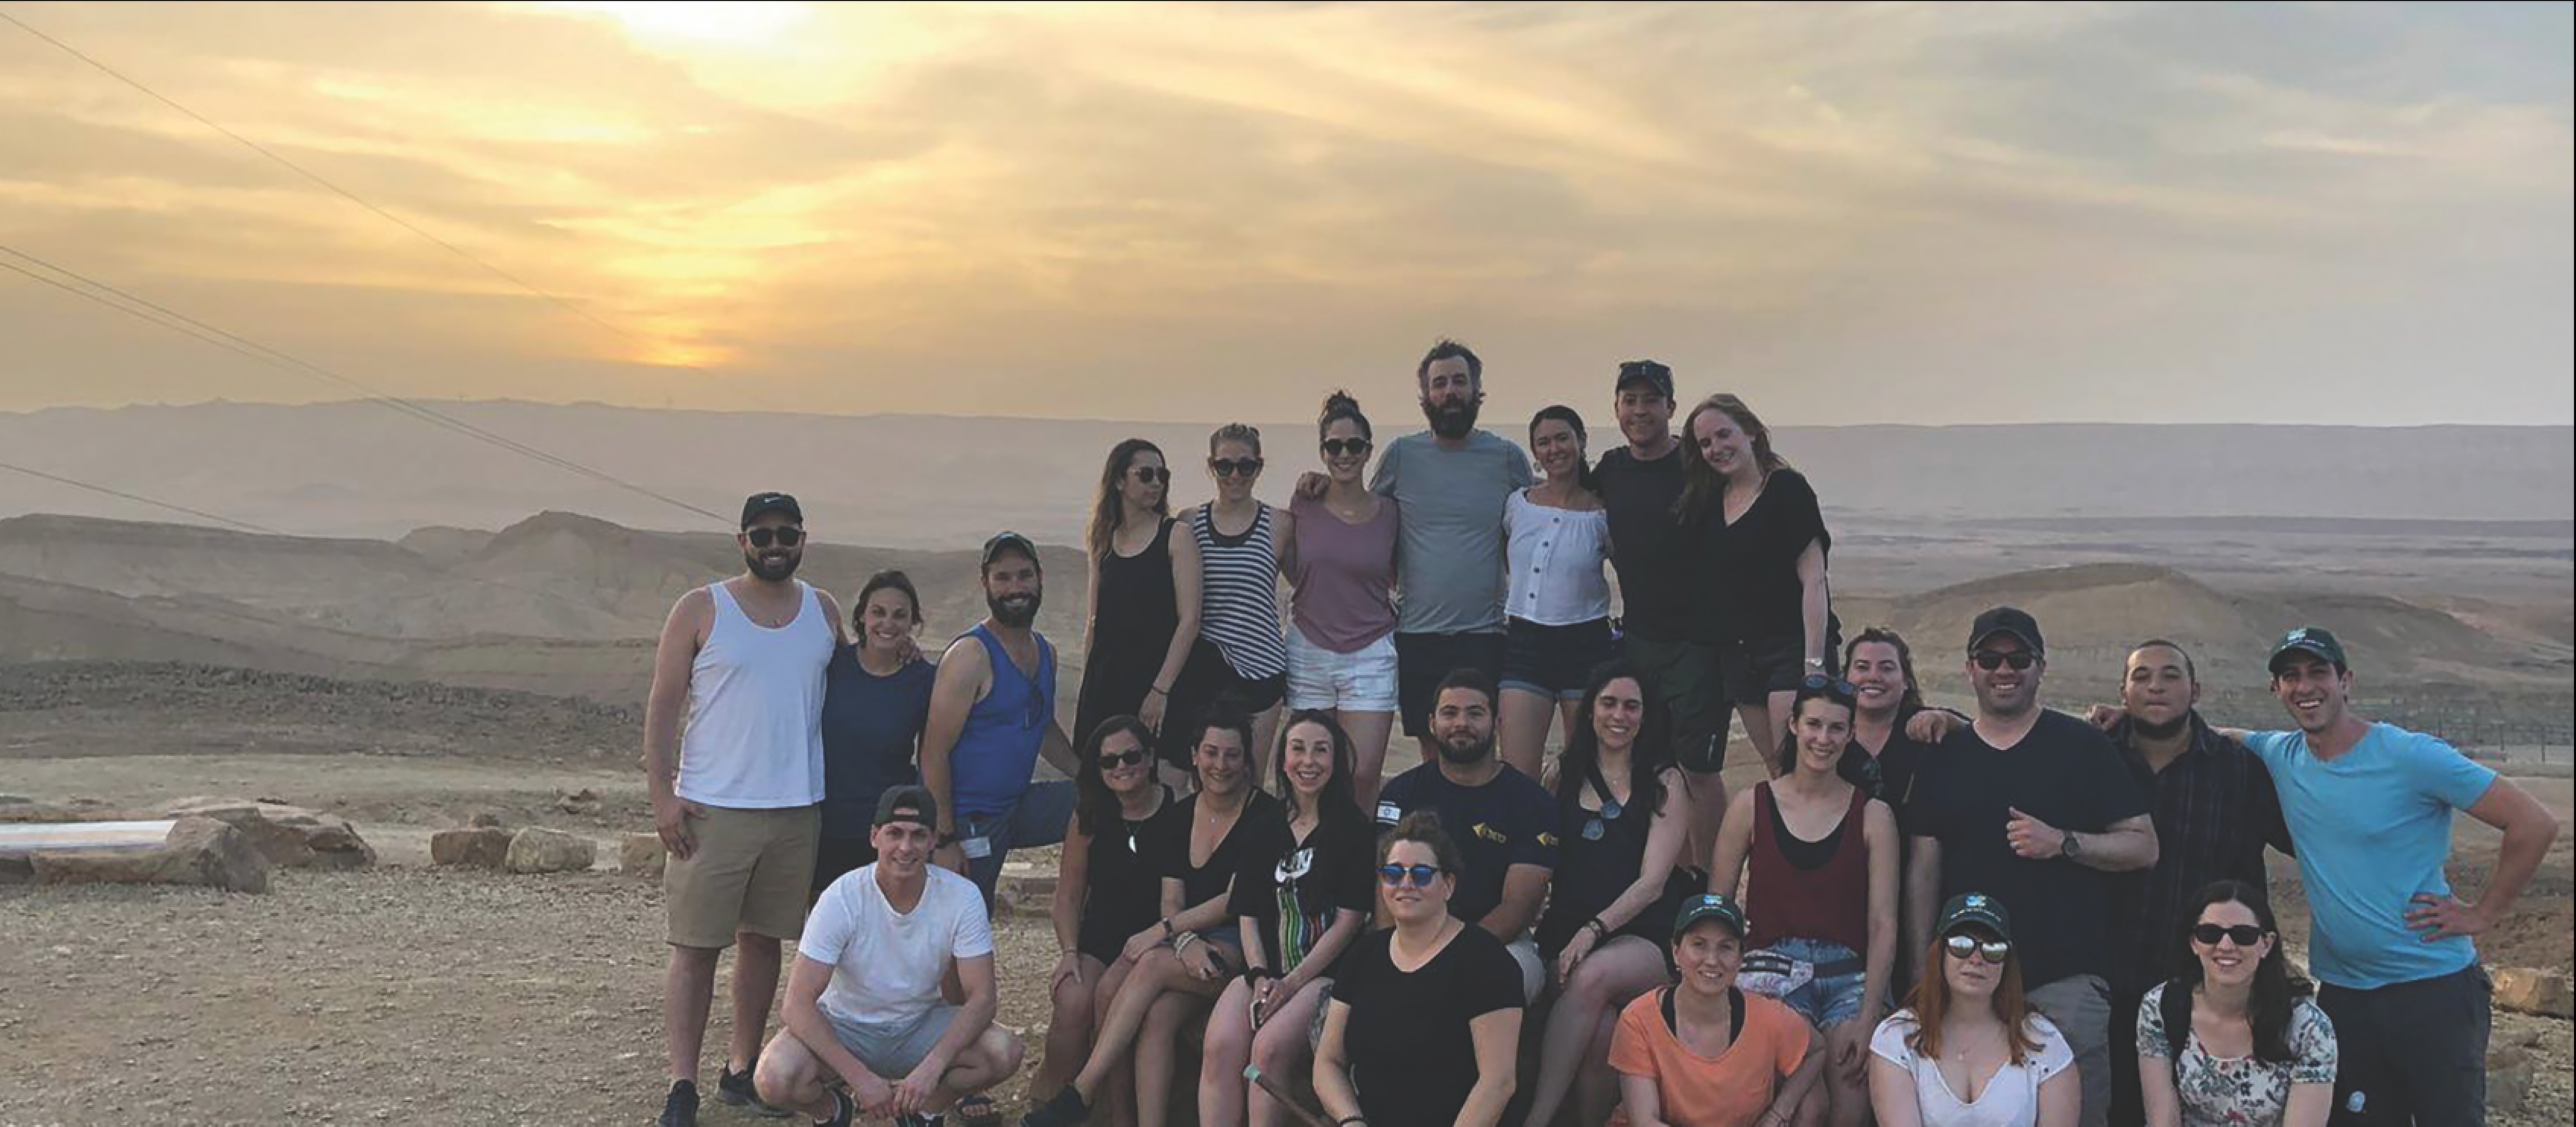 Fonds national juif du Canada | For decades the Jewish National Fund of Canada has cared for the land of Israel. This mission took the role of planting trees, building water reservoirs, preserving natural habitats, and building parks and bicycle trails.